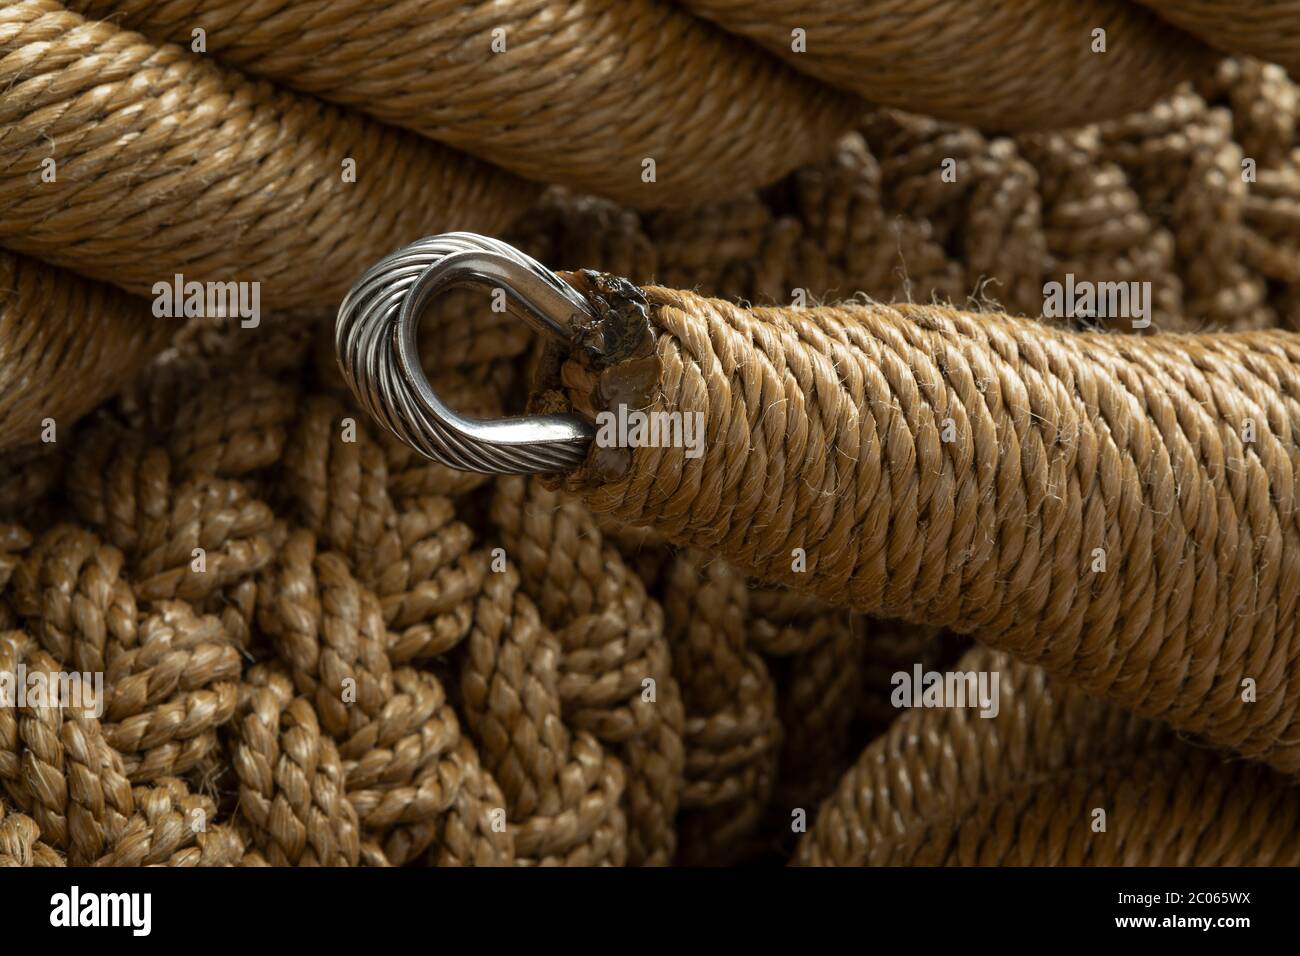 New handmade knotted rope close up full frame with a metal ring Stock Photo